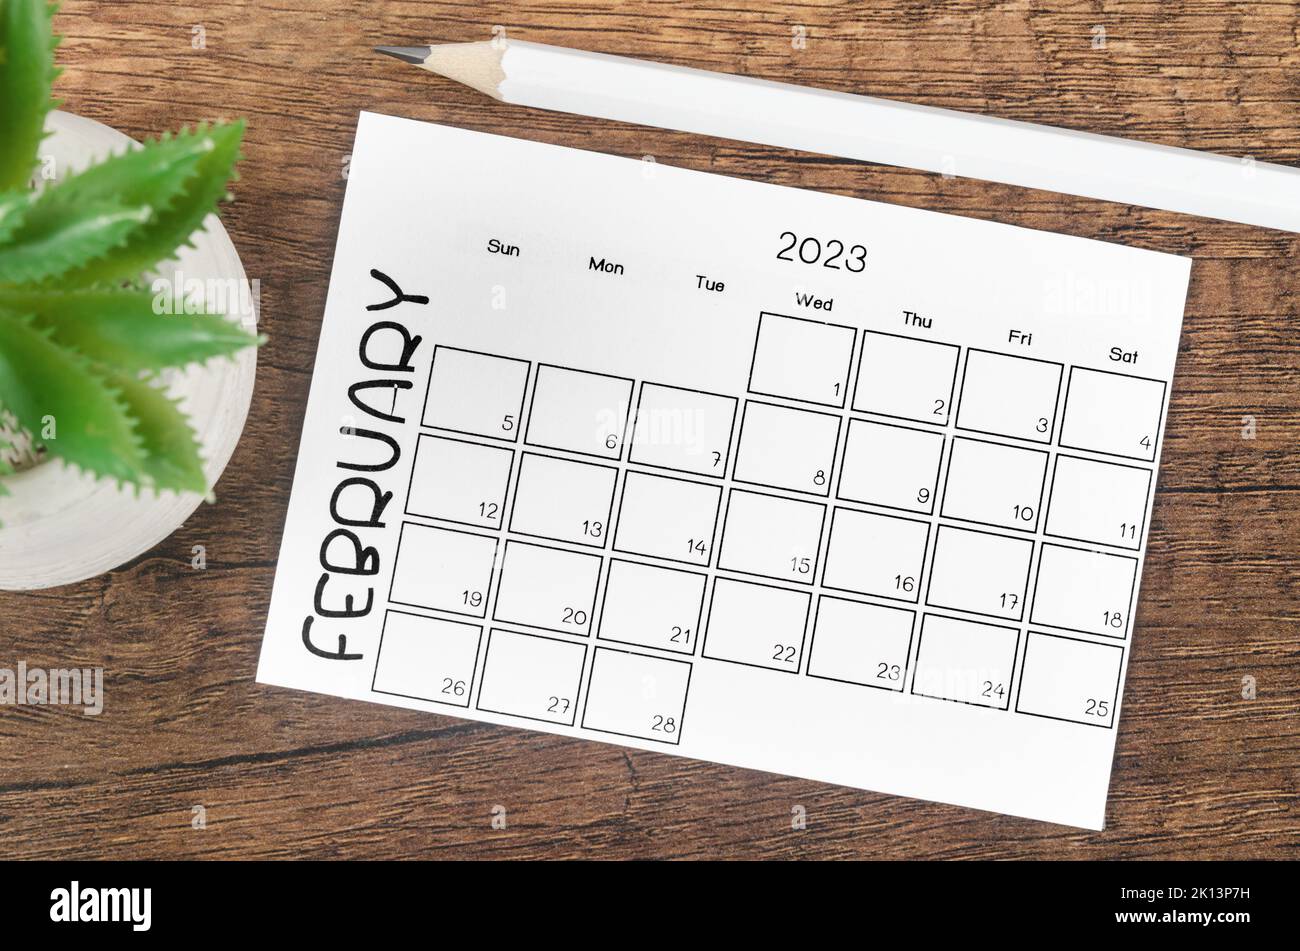 February 2023 Monthly calendar for 2023 year with pencil on wooden table. Stock Photo